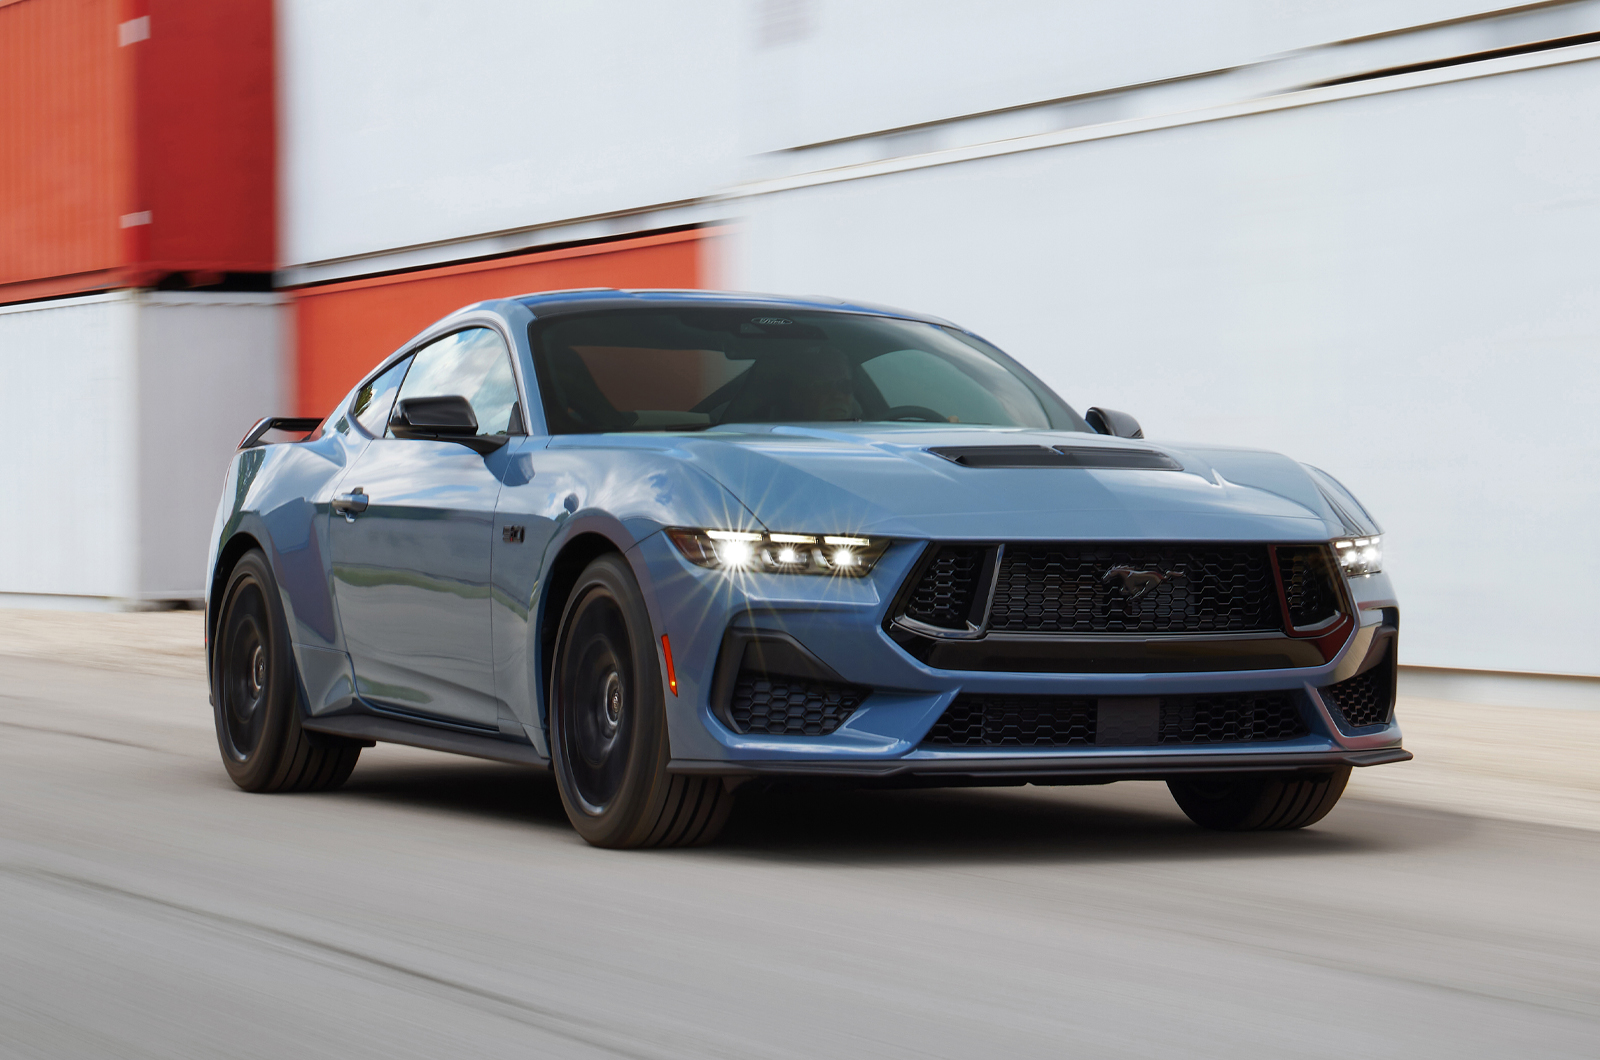 New 2023 Ford Mustang keeps V8 punch - glbnews.com